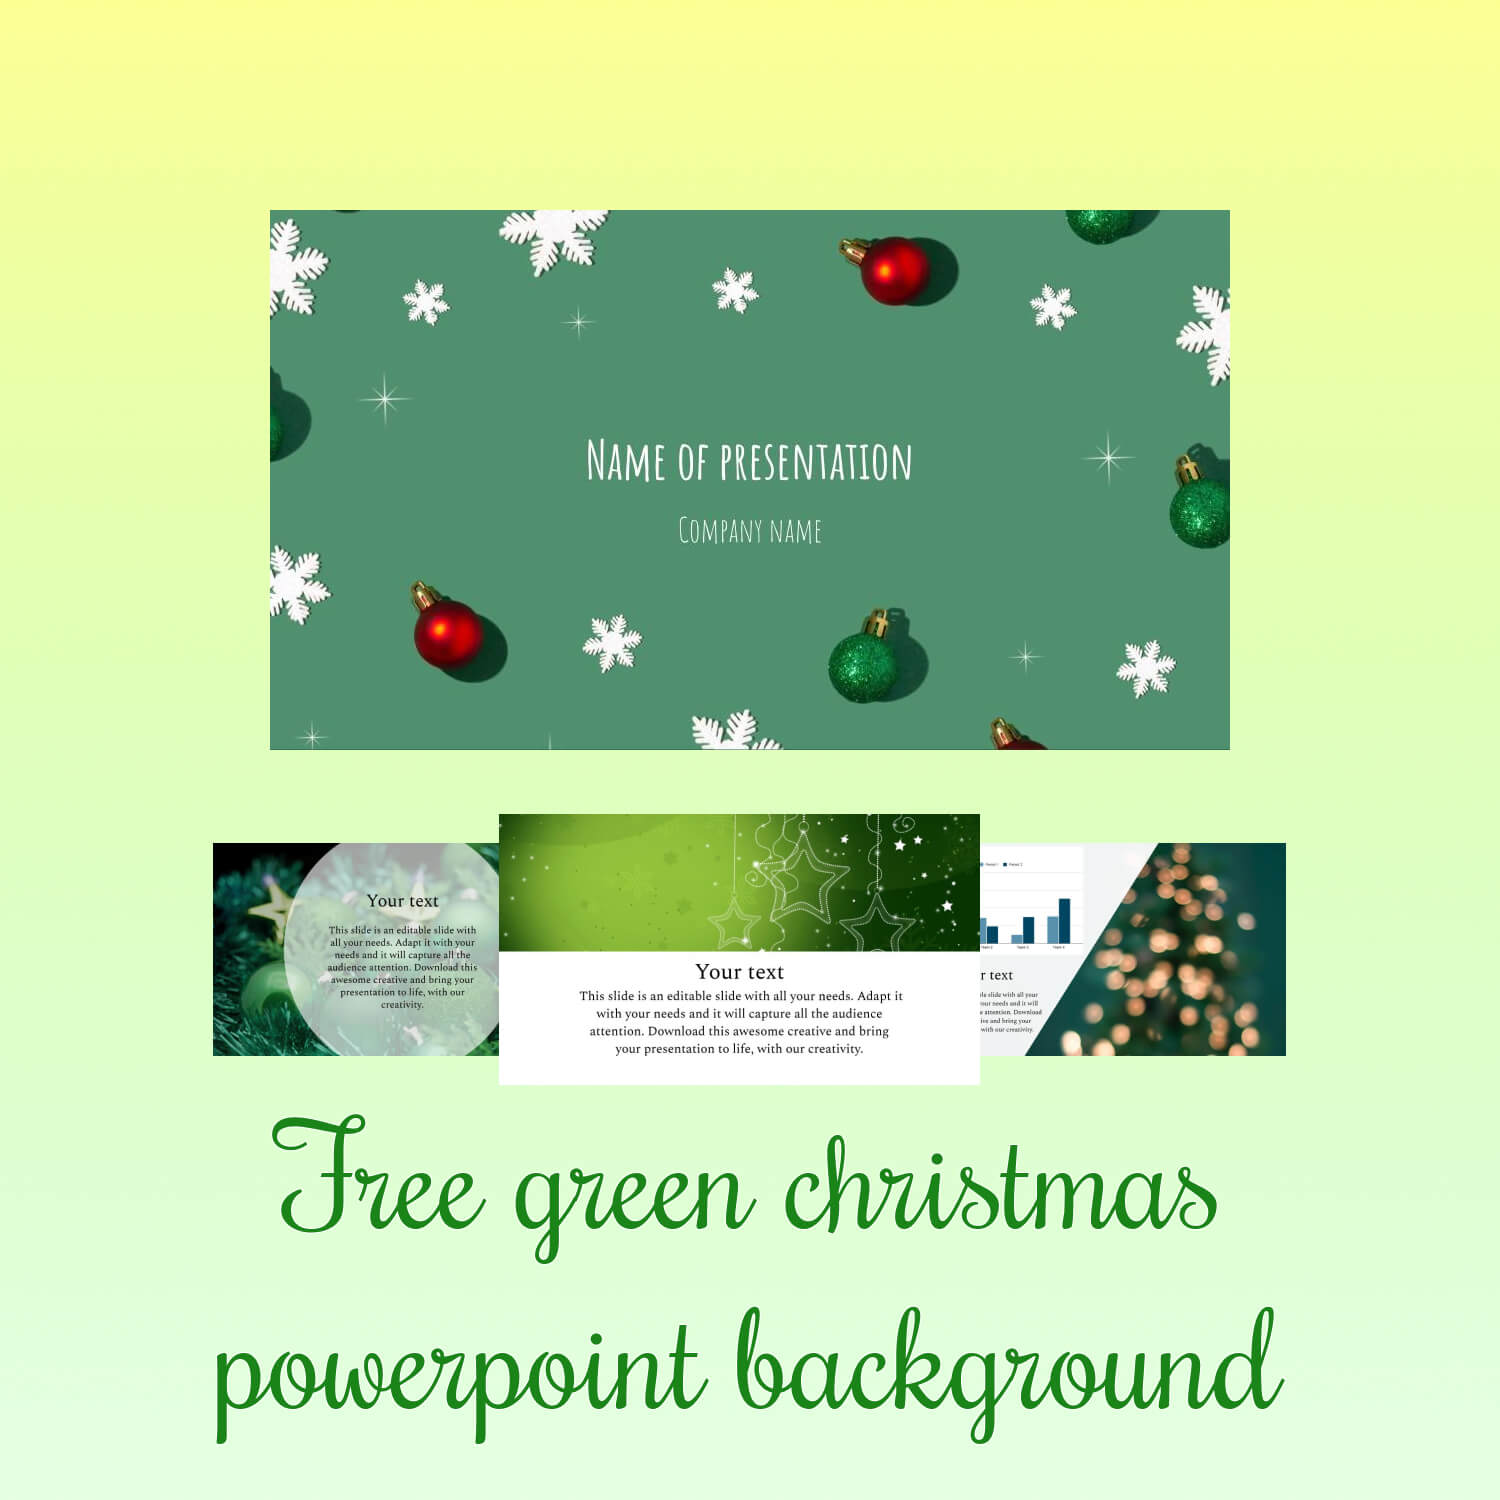 Free Green Christmas Powerpoint Background.